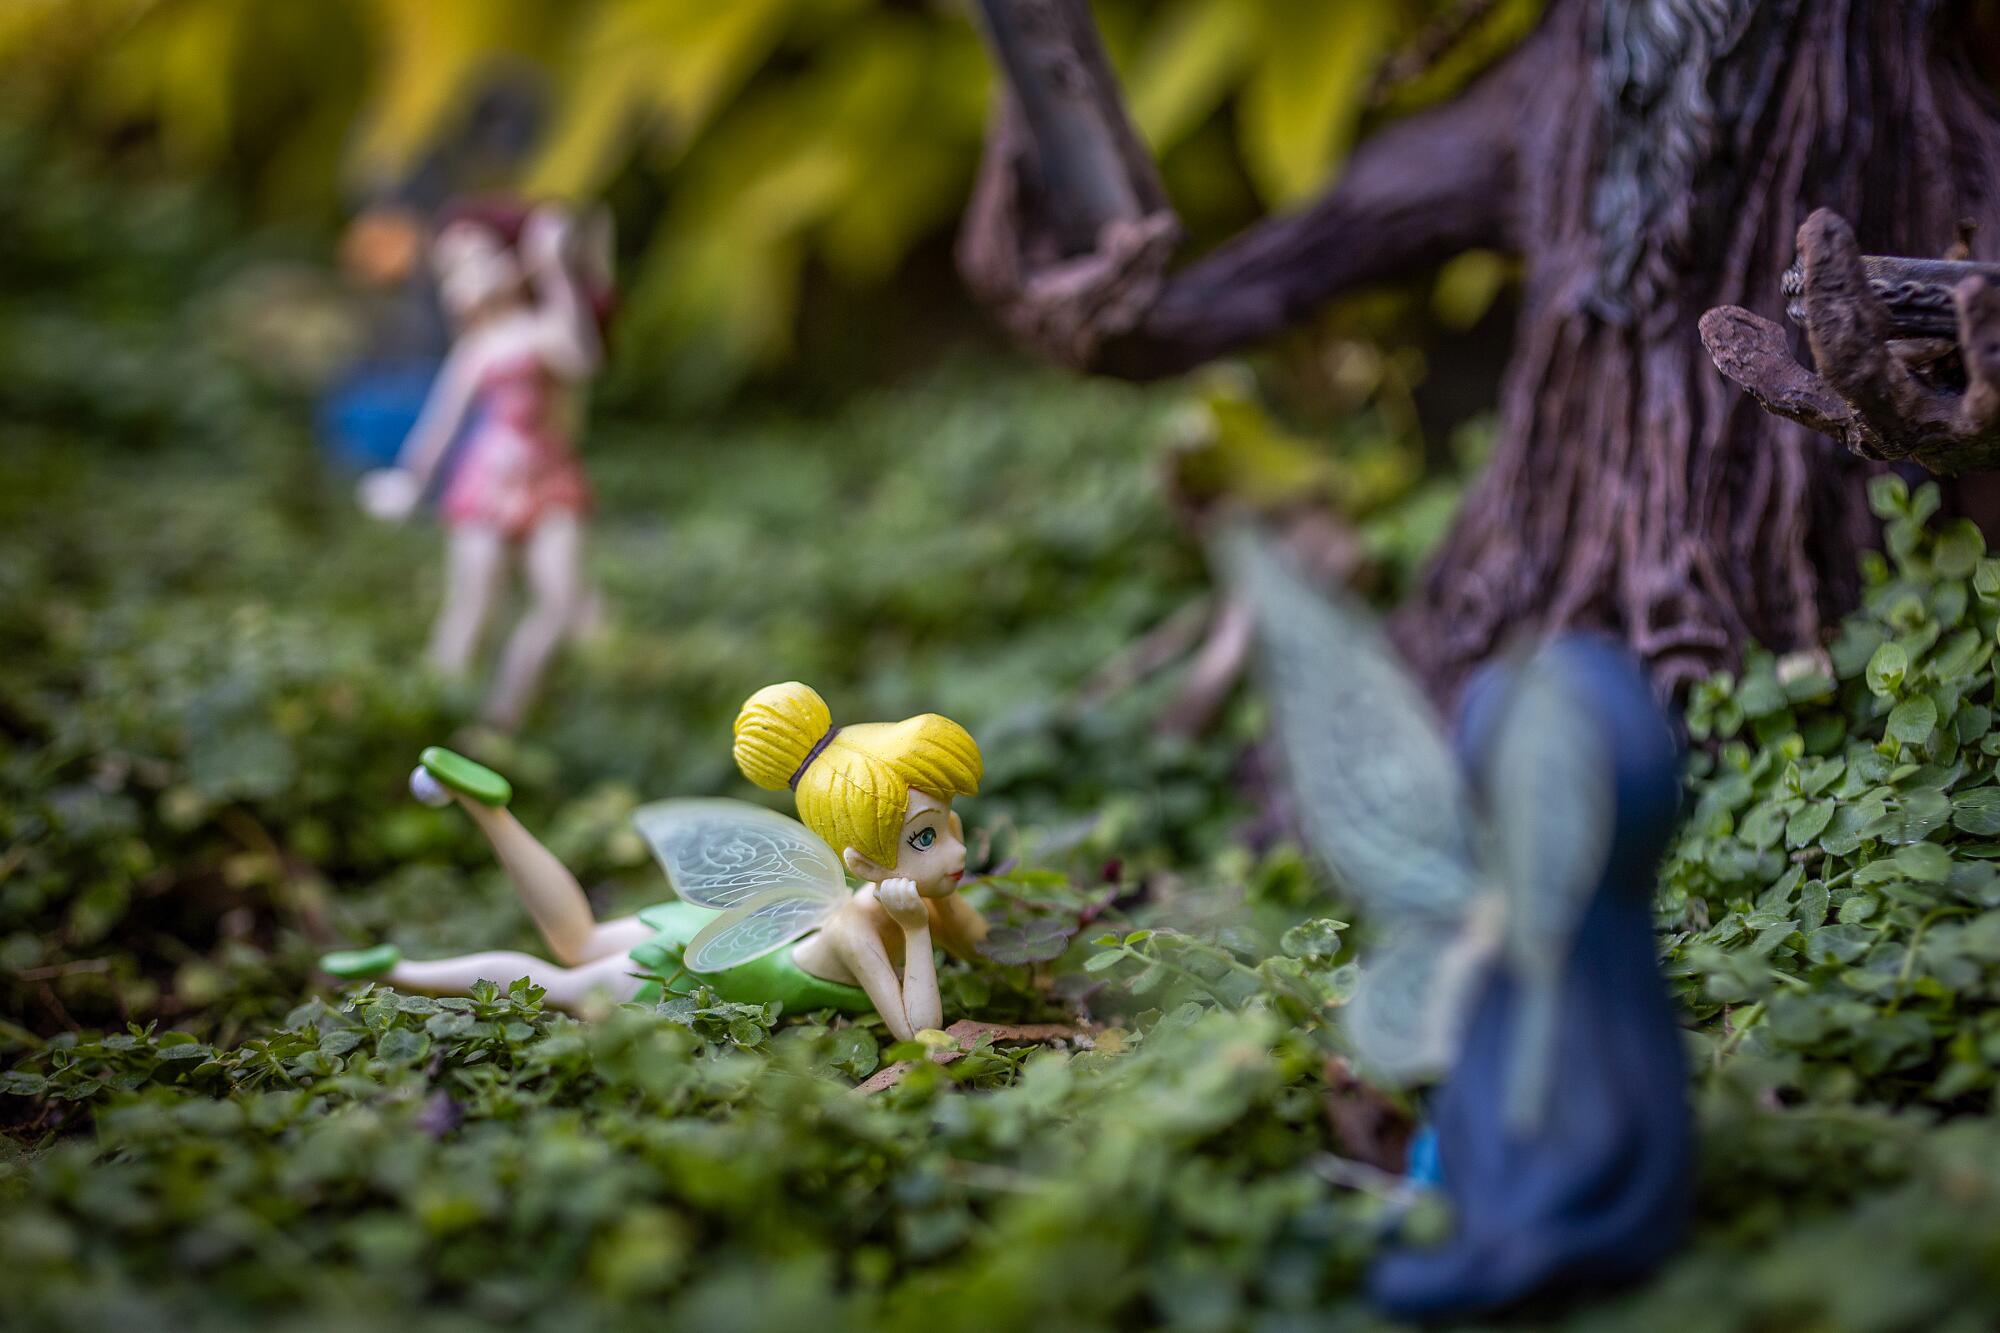 A miniature Tinker Bell in a green forest scene.